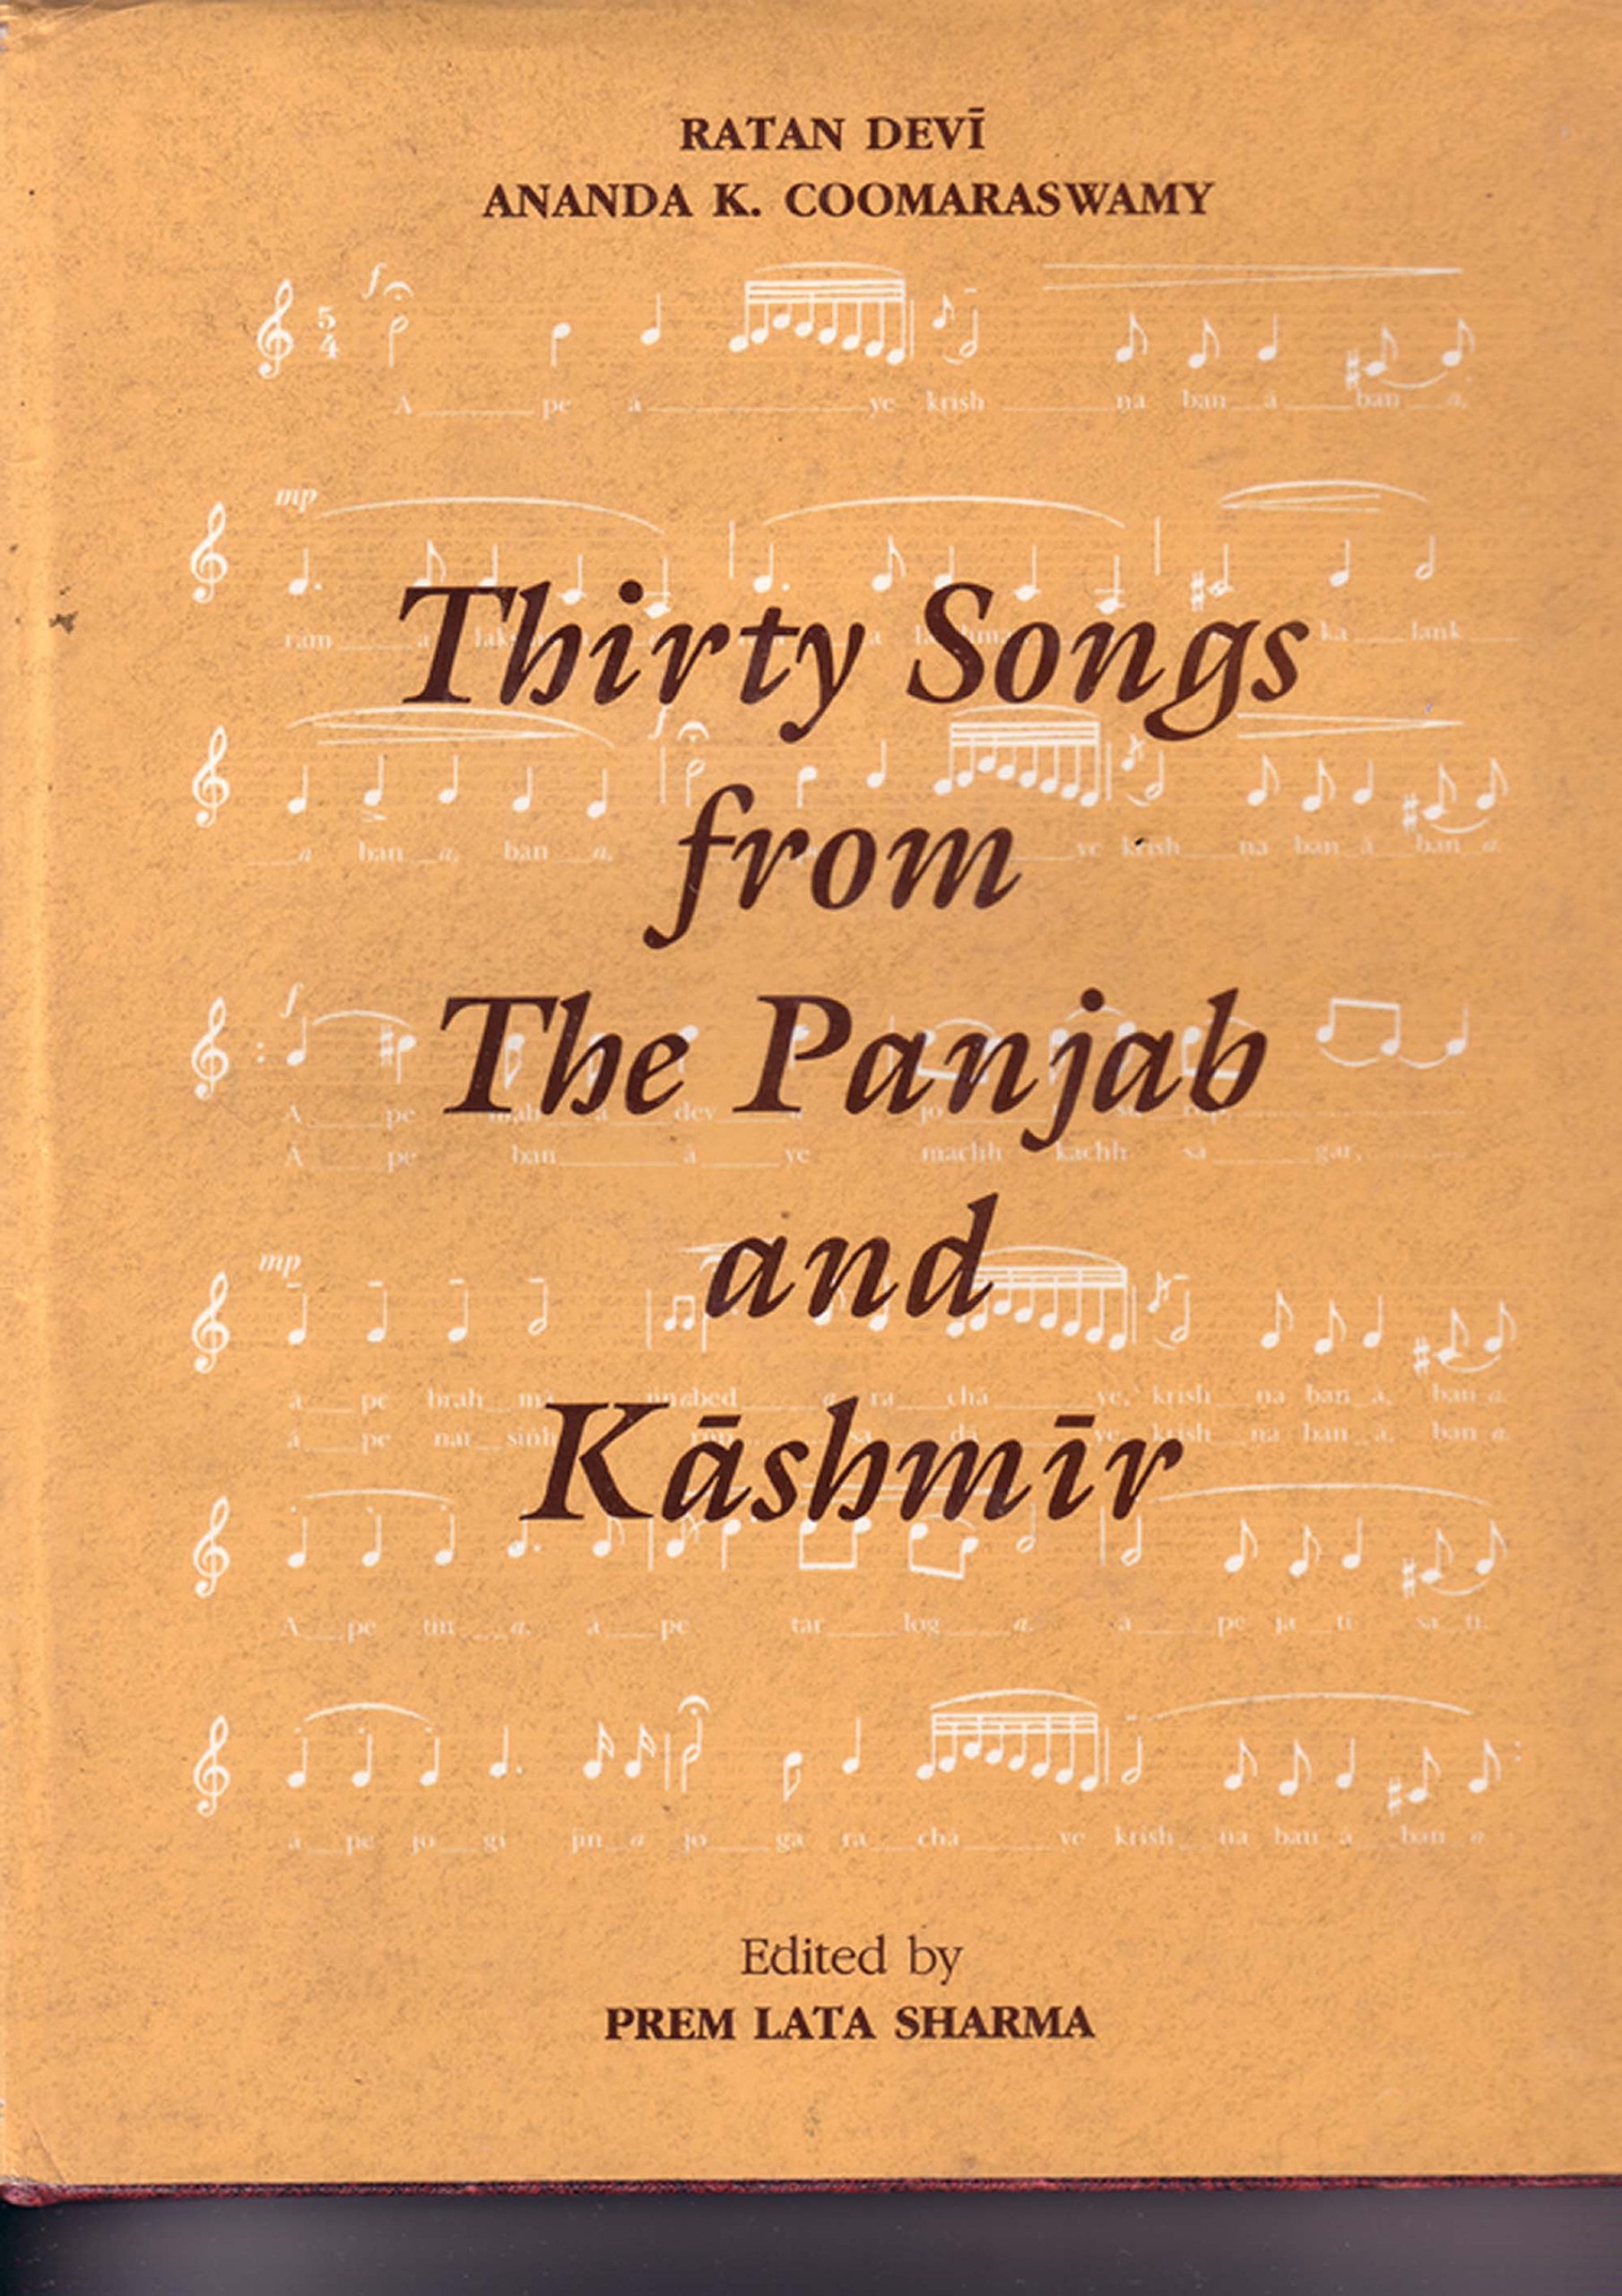 thirty songs from the panjab and kashmir